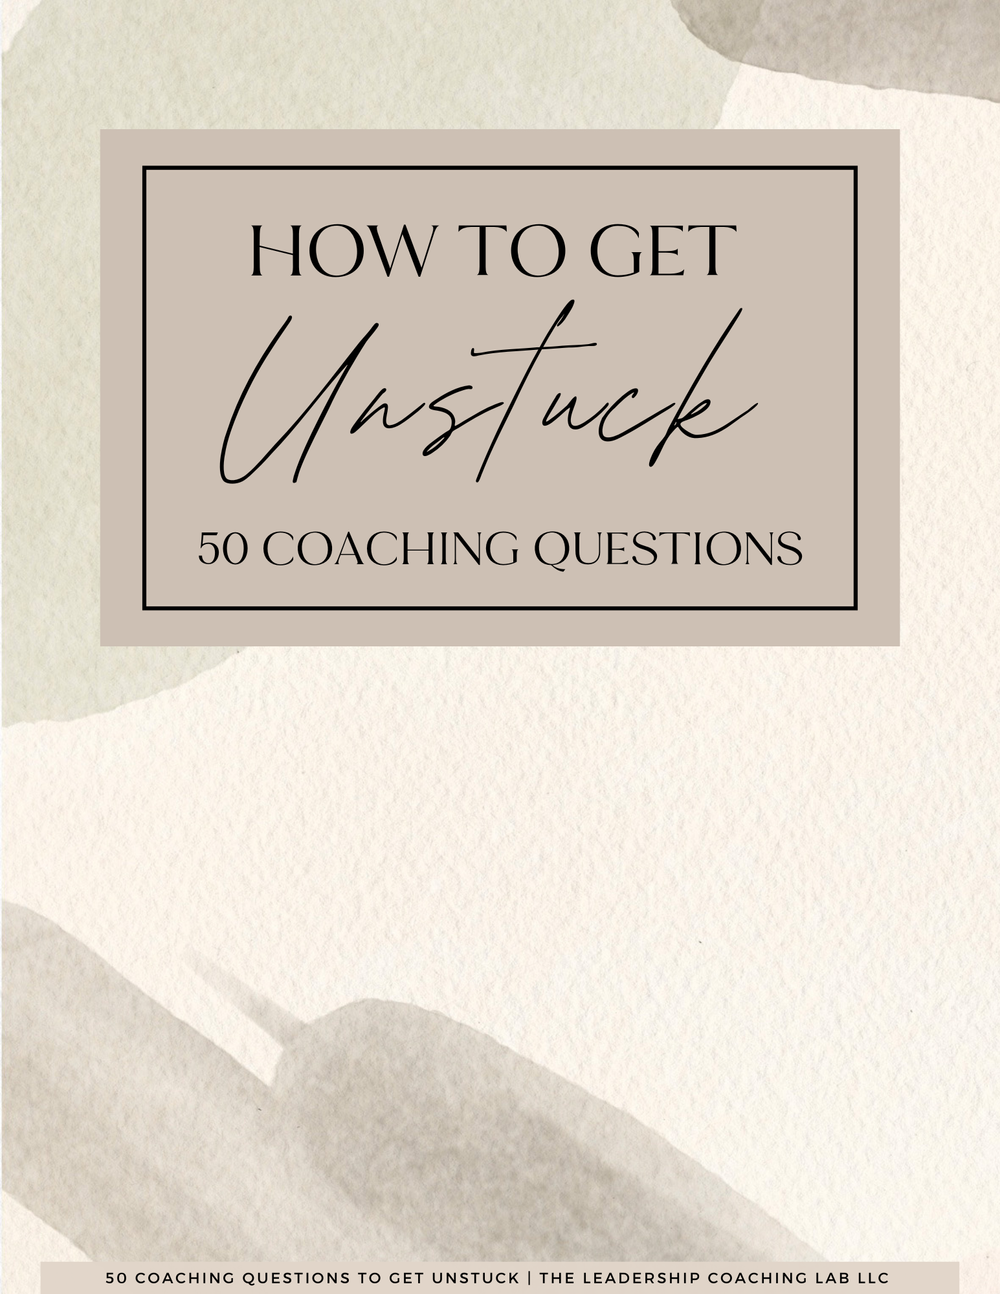 How to Get Unstuck 50 Coaching Questions.png